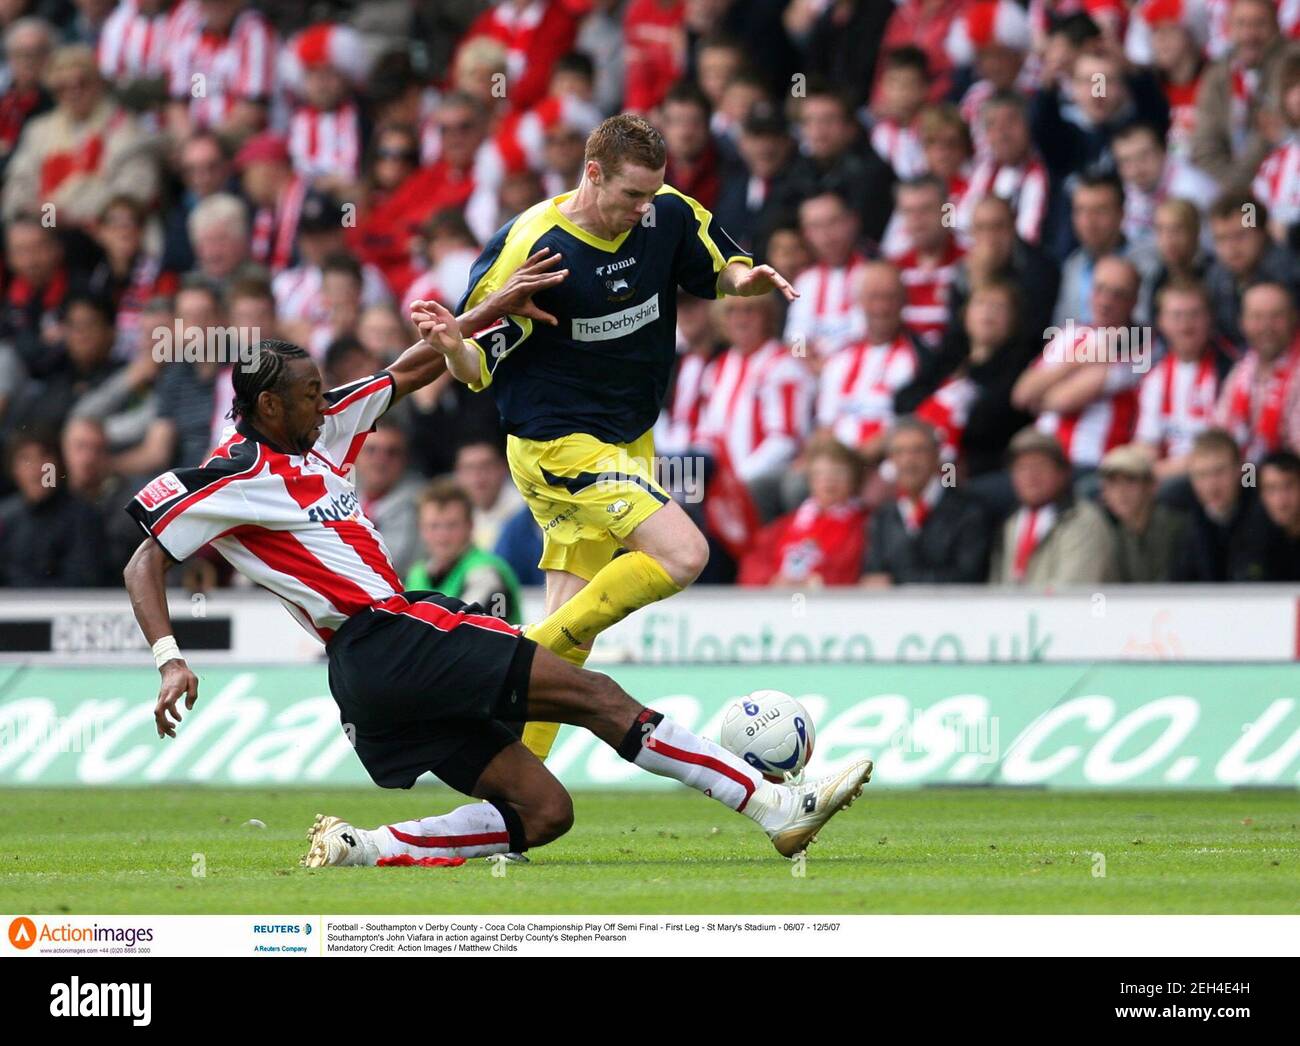 Football - Southampton v Derby County - Coca-Cola Championship Play Off  Semi Final - First Leg - St Mary's Stadium - 06/07 - 12/5/07 Southampton's  John Viafara in action against Derby County's